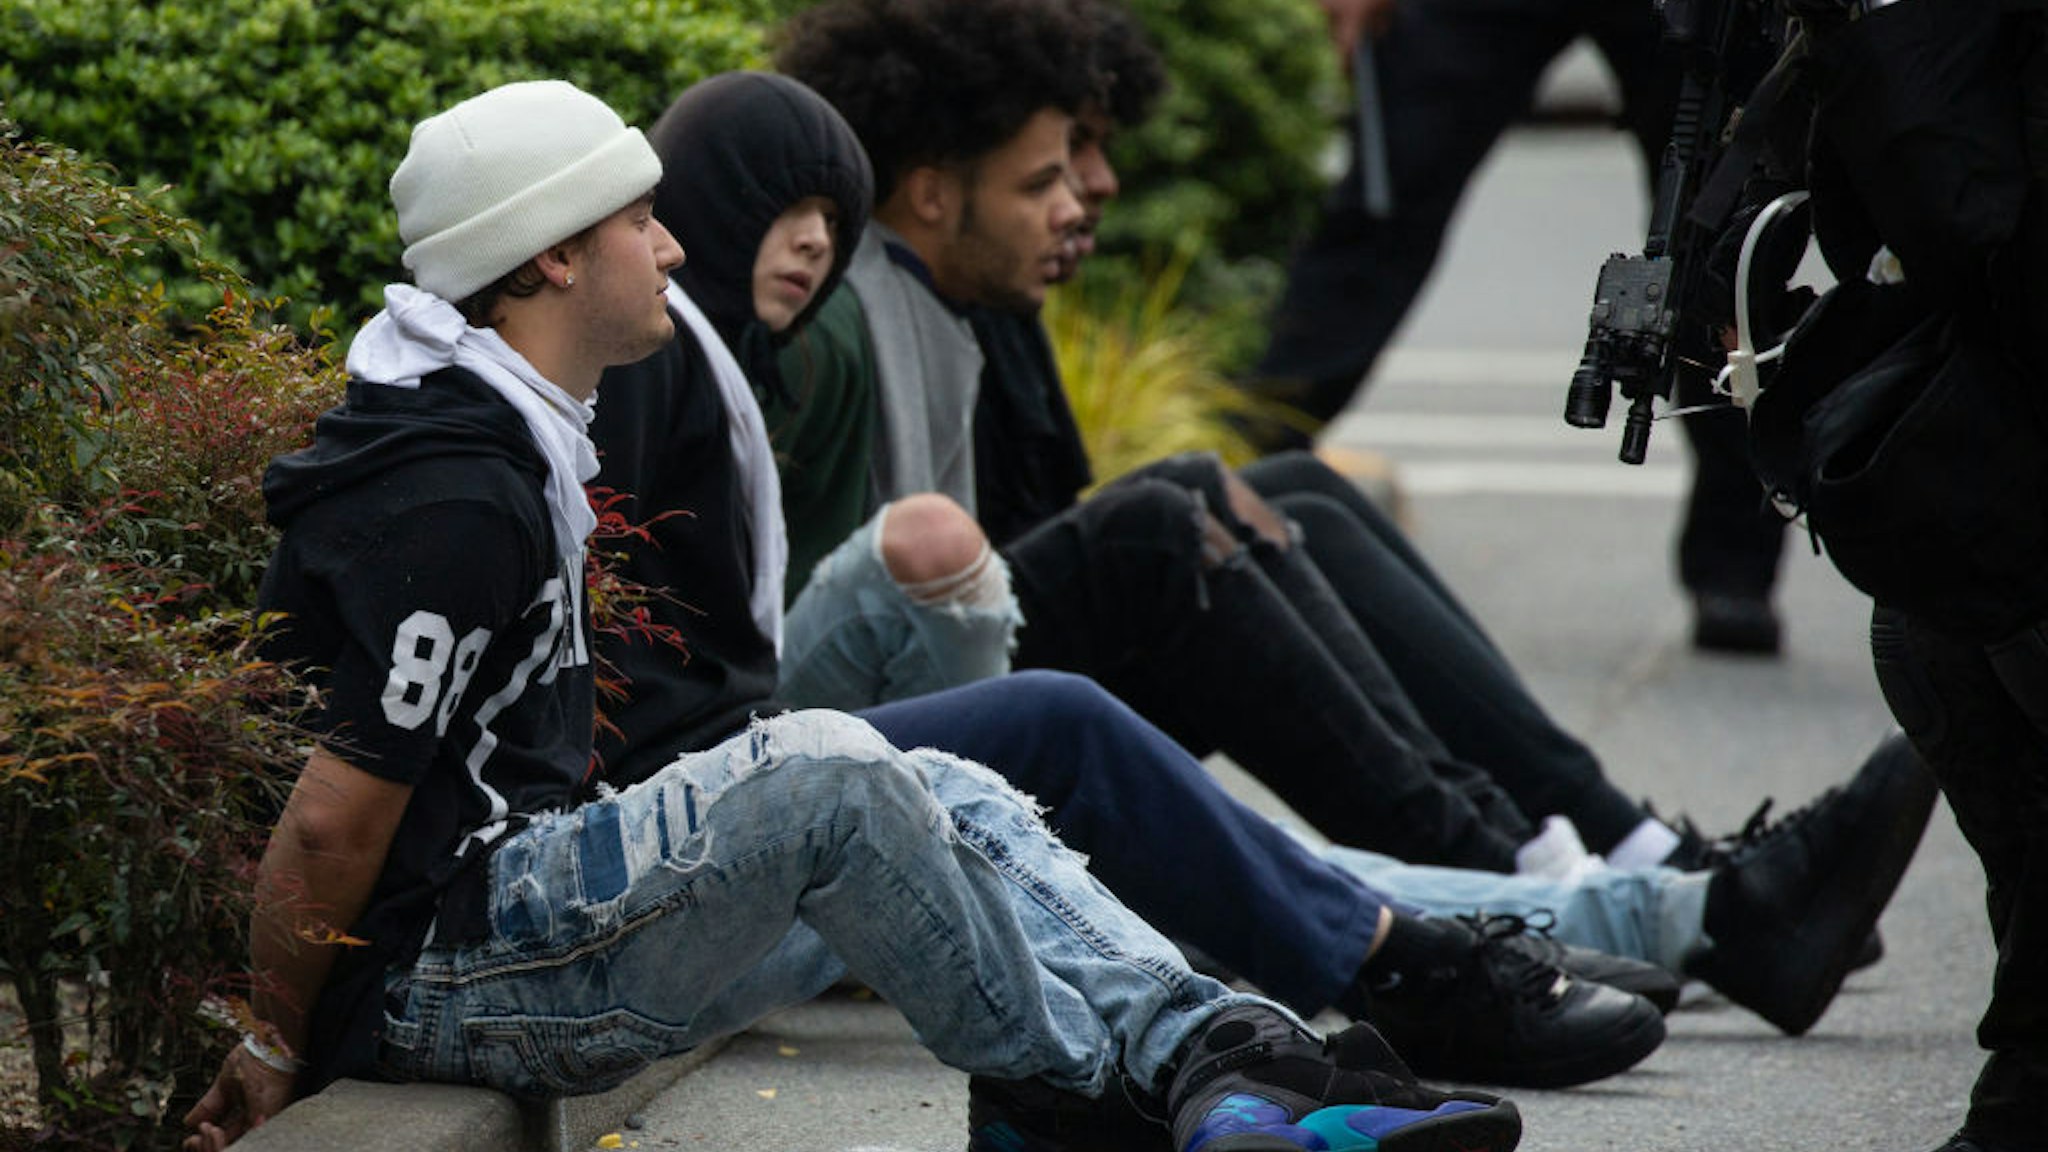 BELLEVUE, WA - MAY 31: Police detain people near Bellevue Square Mall on May 31, 2020 in Bellevue, Washington. Protests due to the recent death of George Floyd took place in Bellevue in addition to Seattle, with looting in Bellevue and at least one burned automobile there. (Photo by David Ryder/Getty Images)